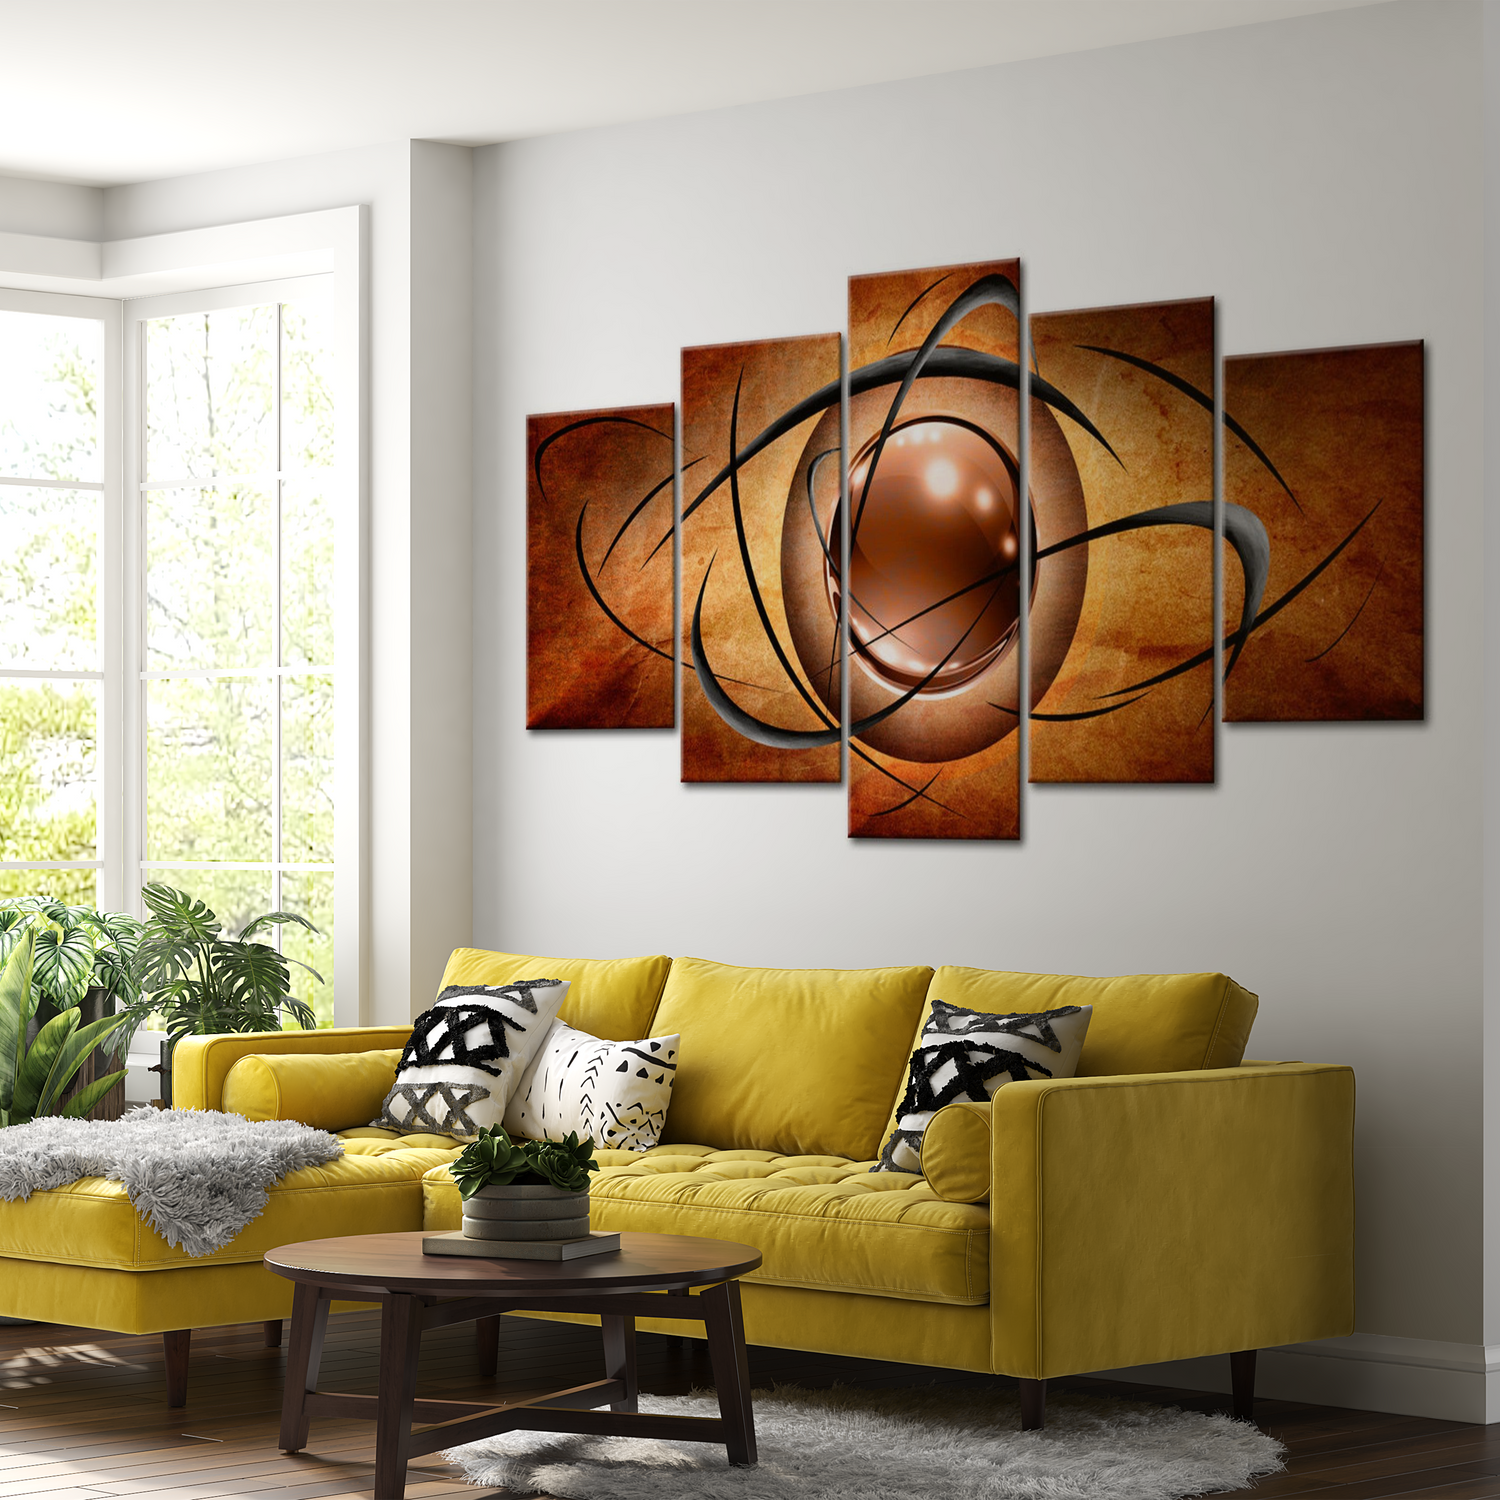 Stretched Canvas Glamour Art - Rotating Globe 40"Wx20"H